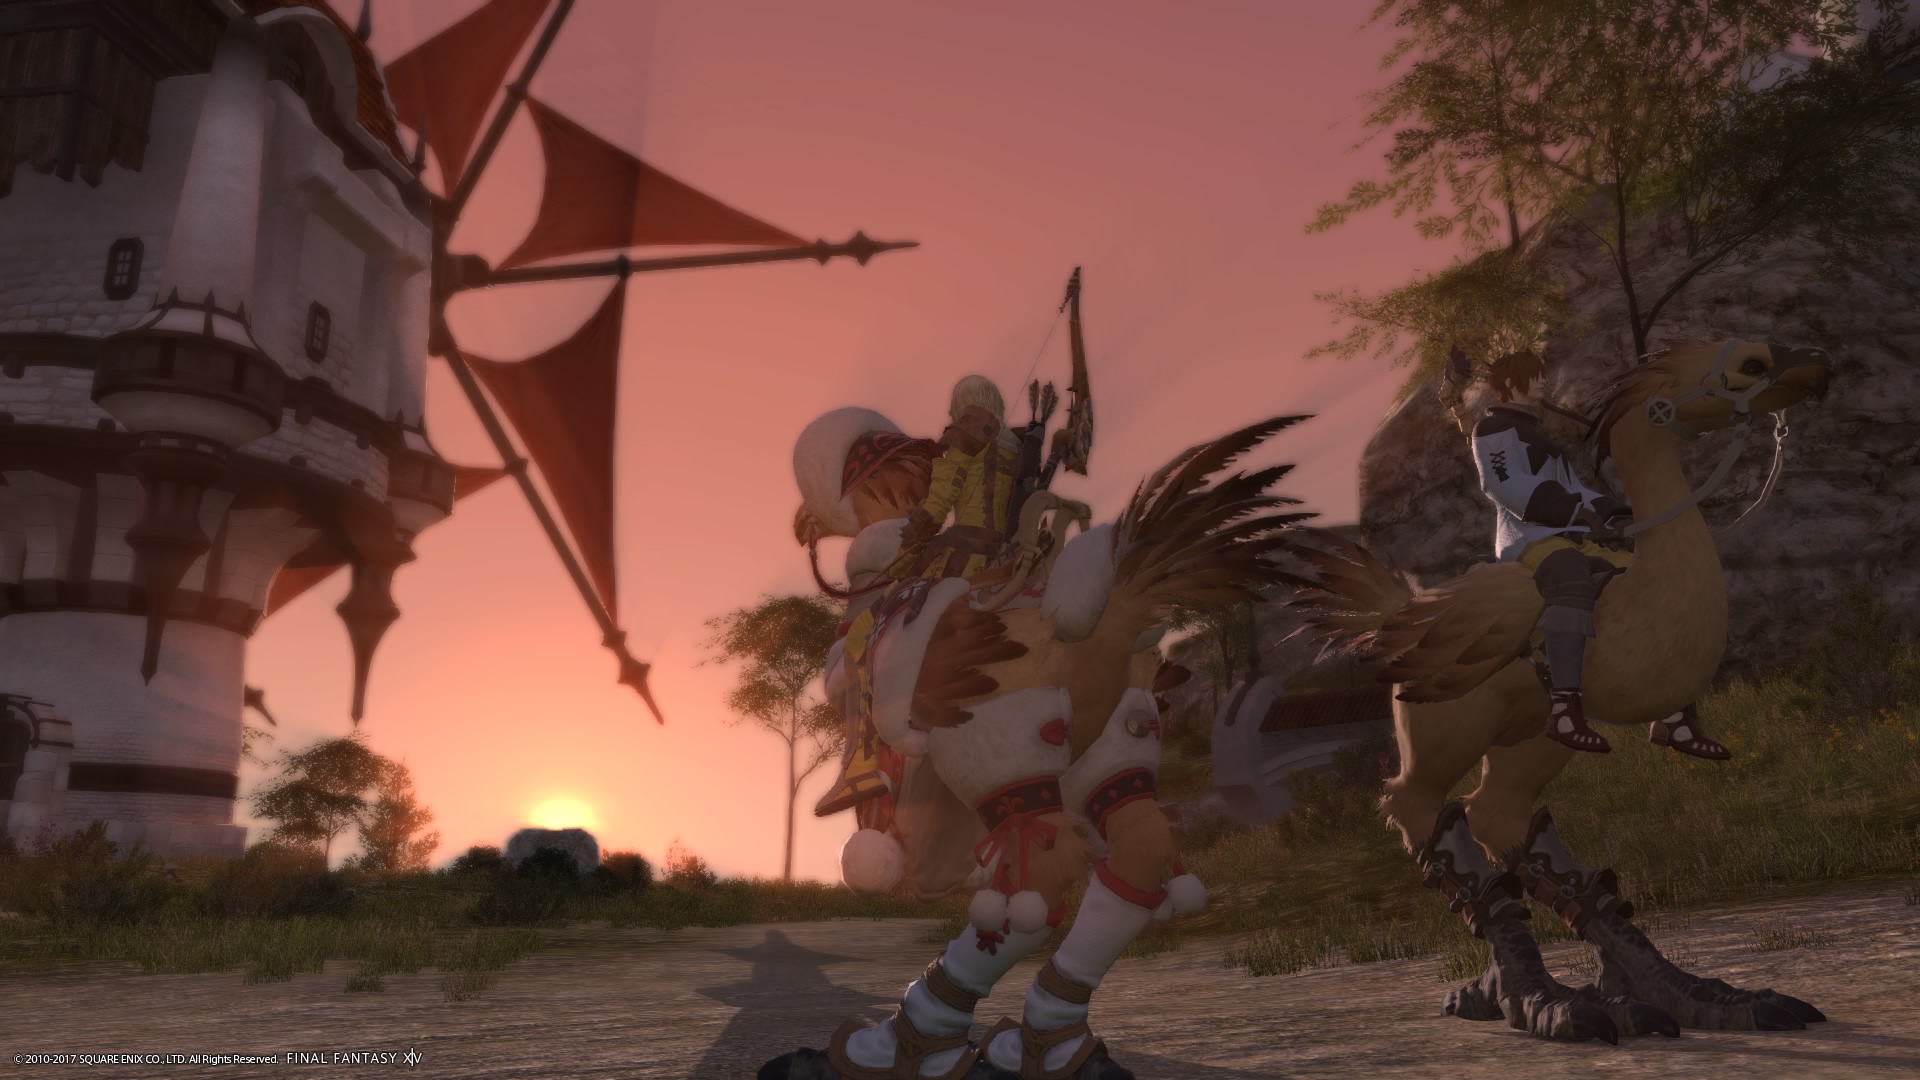 On chocobos at sunset in La Noscea.